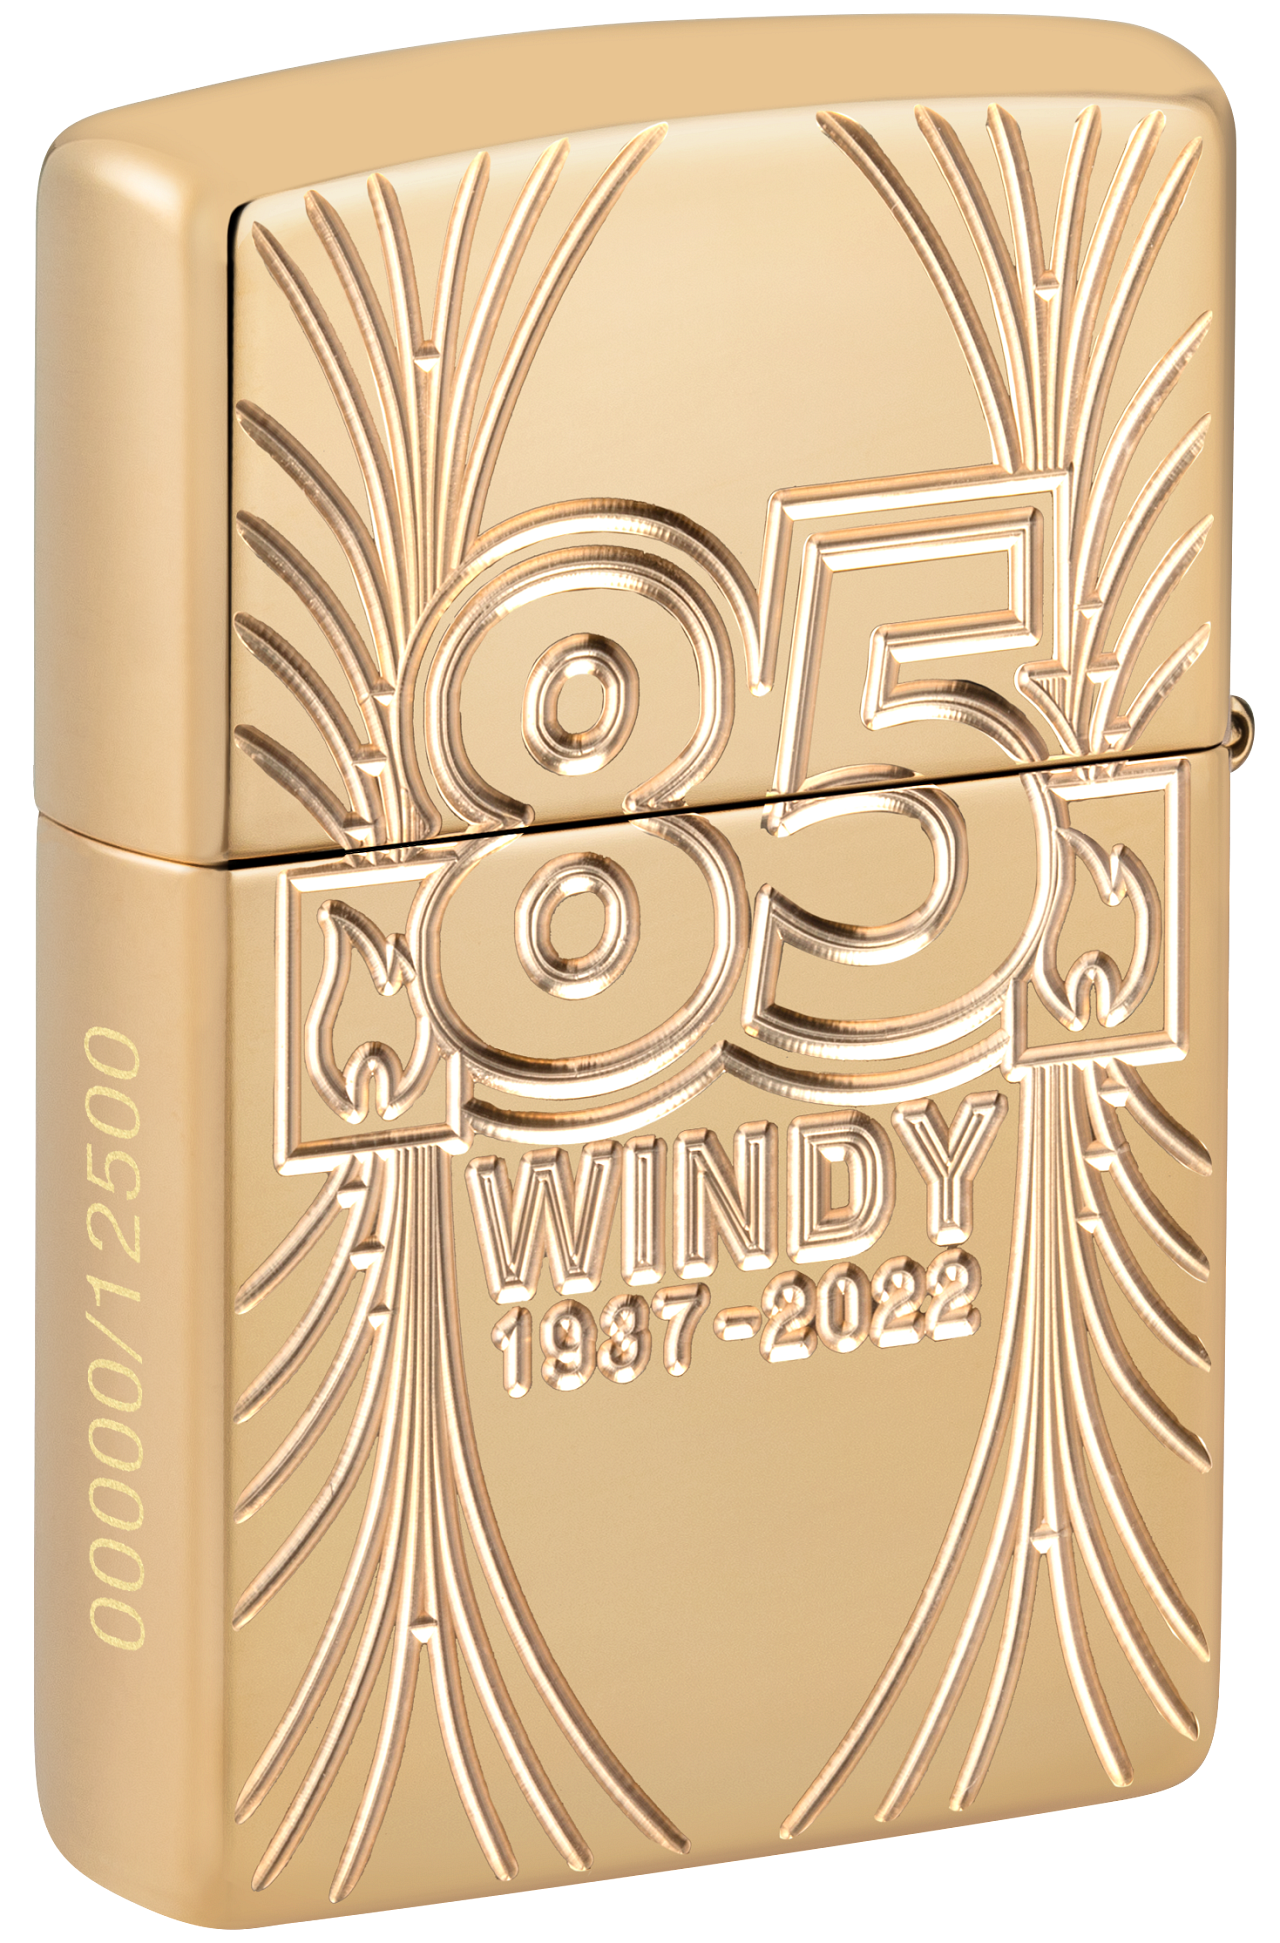 Zippo Windy Girl 85th Anniversary Collectible Armor Lighter #48413 